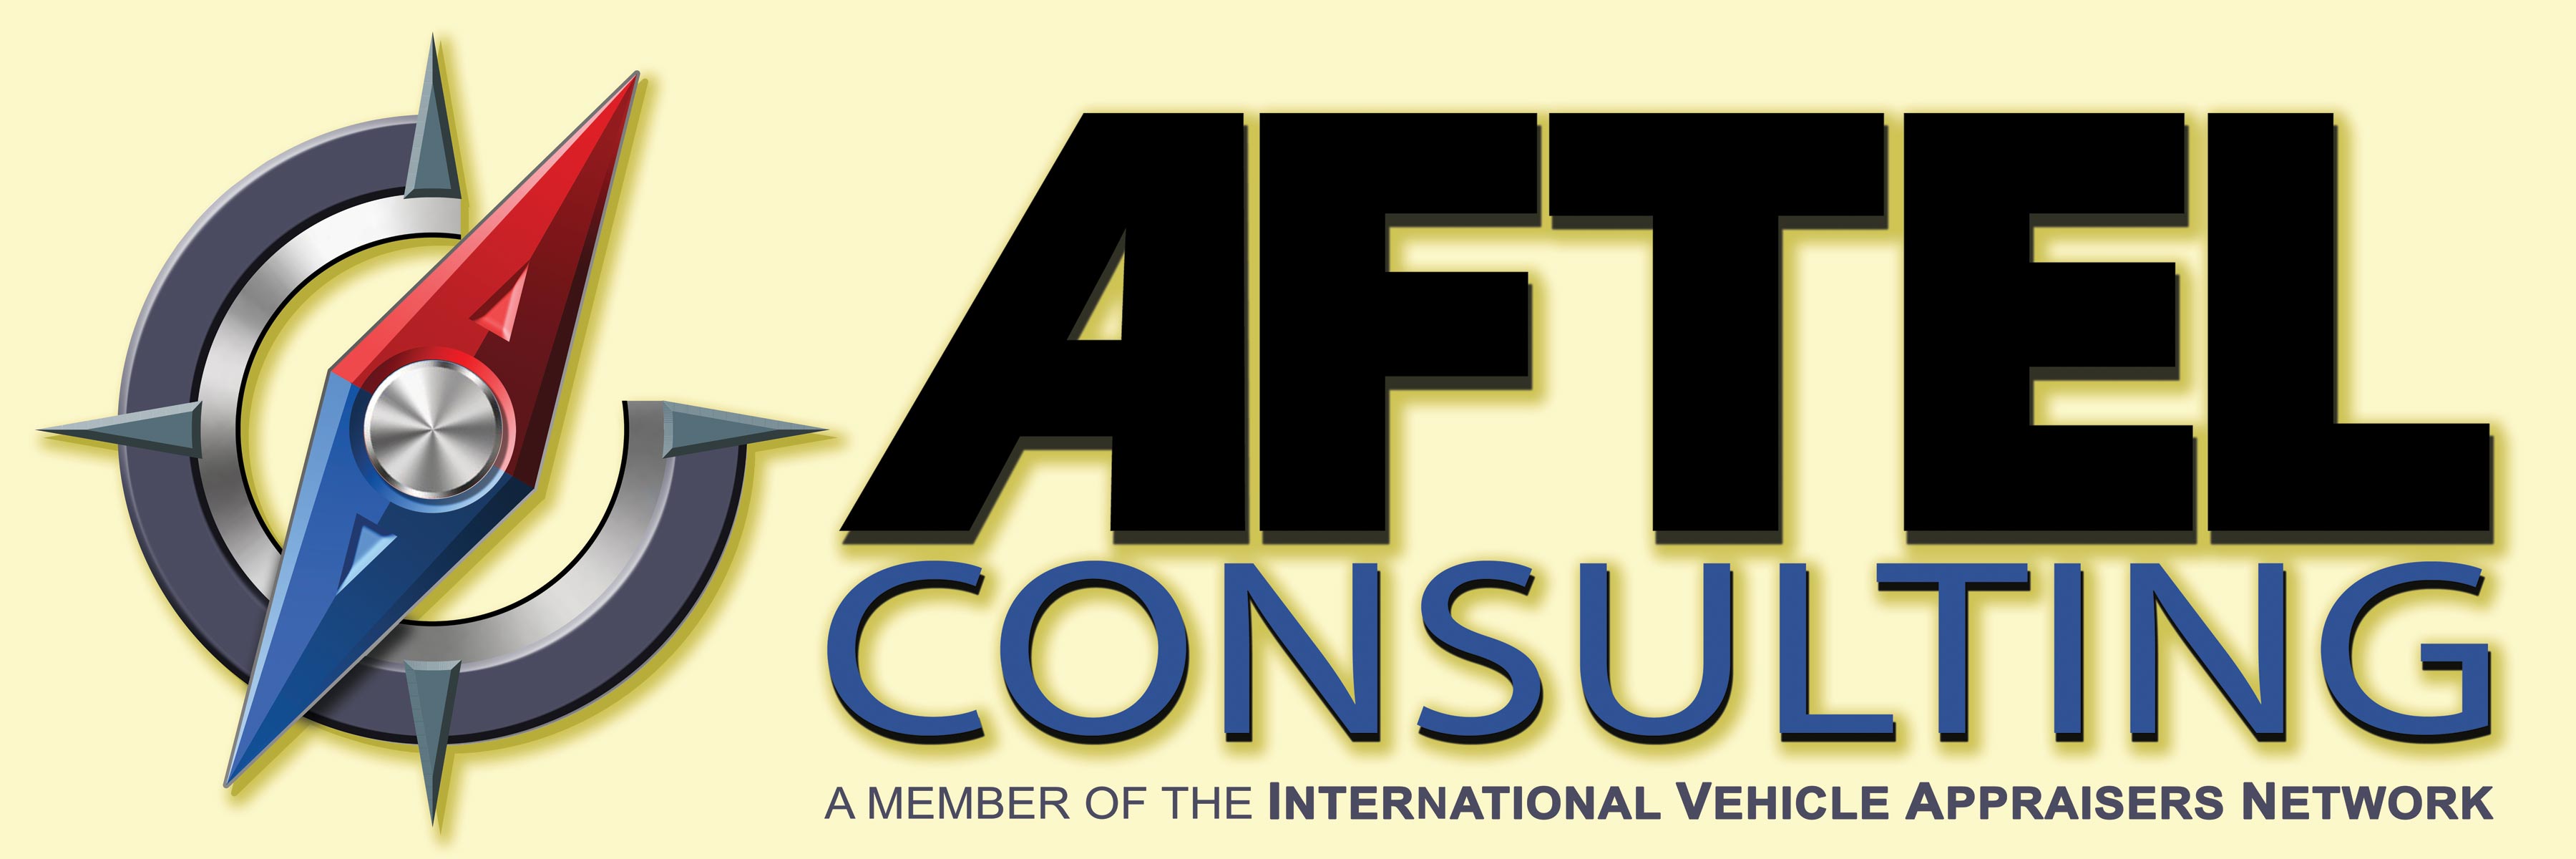 Aftel Consulting Logo